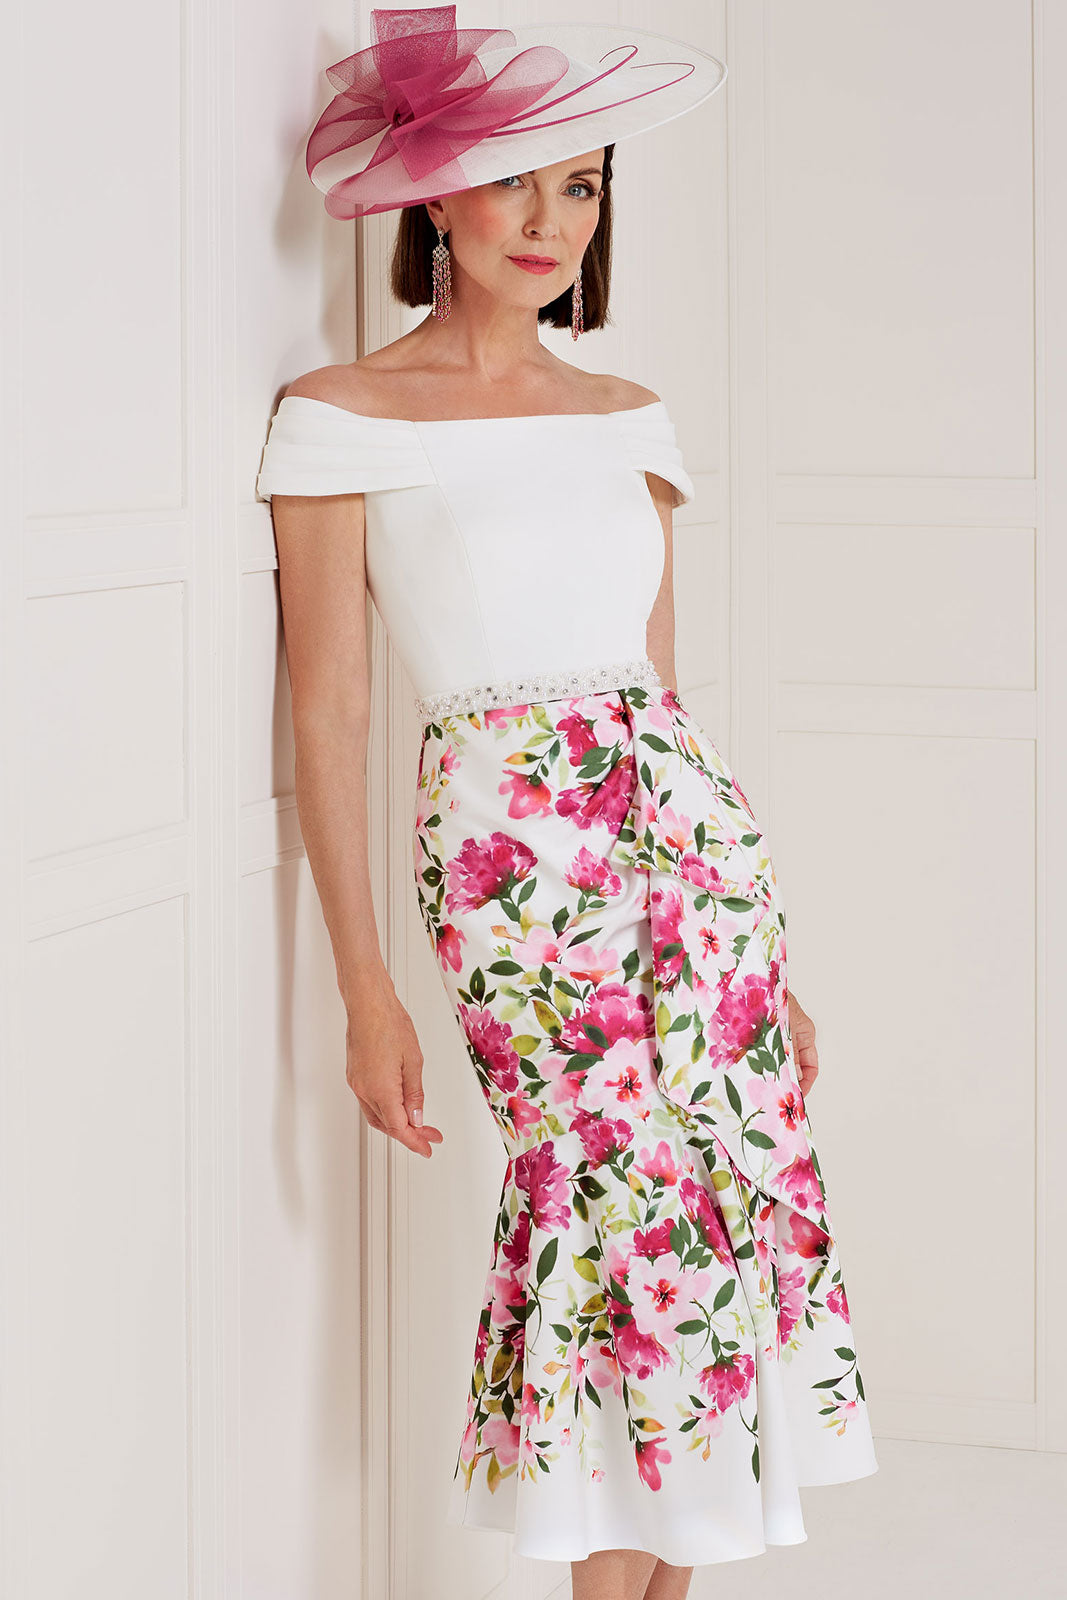 Pink & White Floral Print off the Shoulder Dress with Beaded Belt